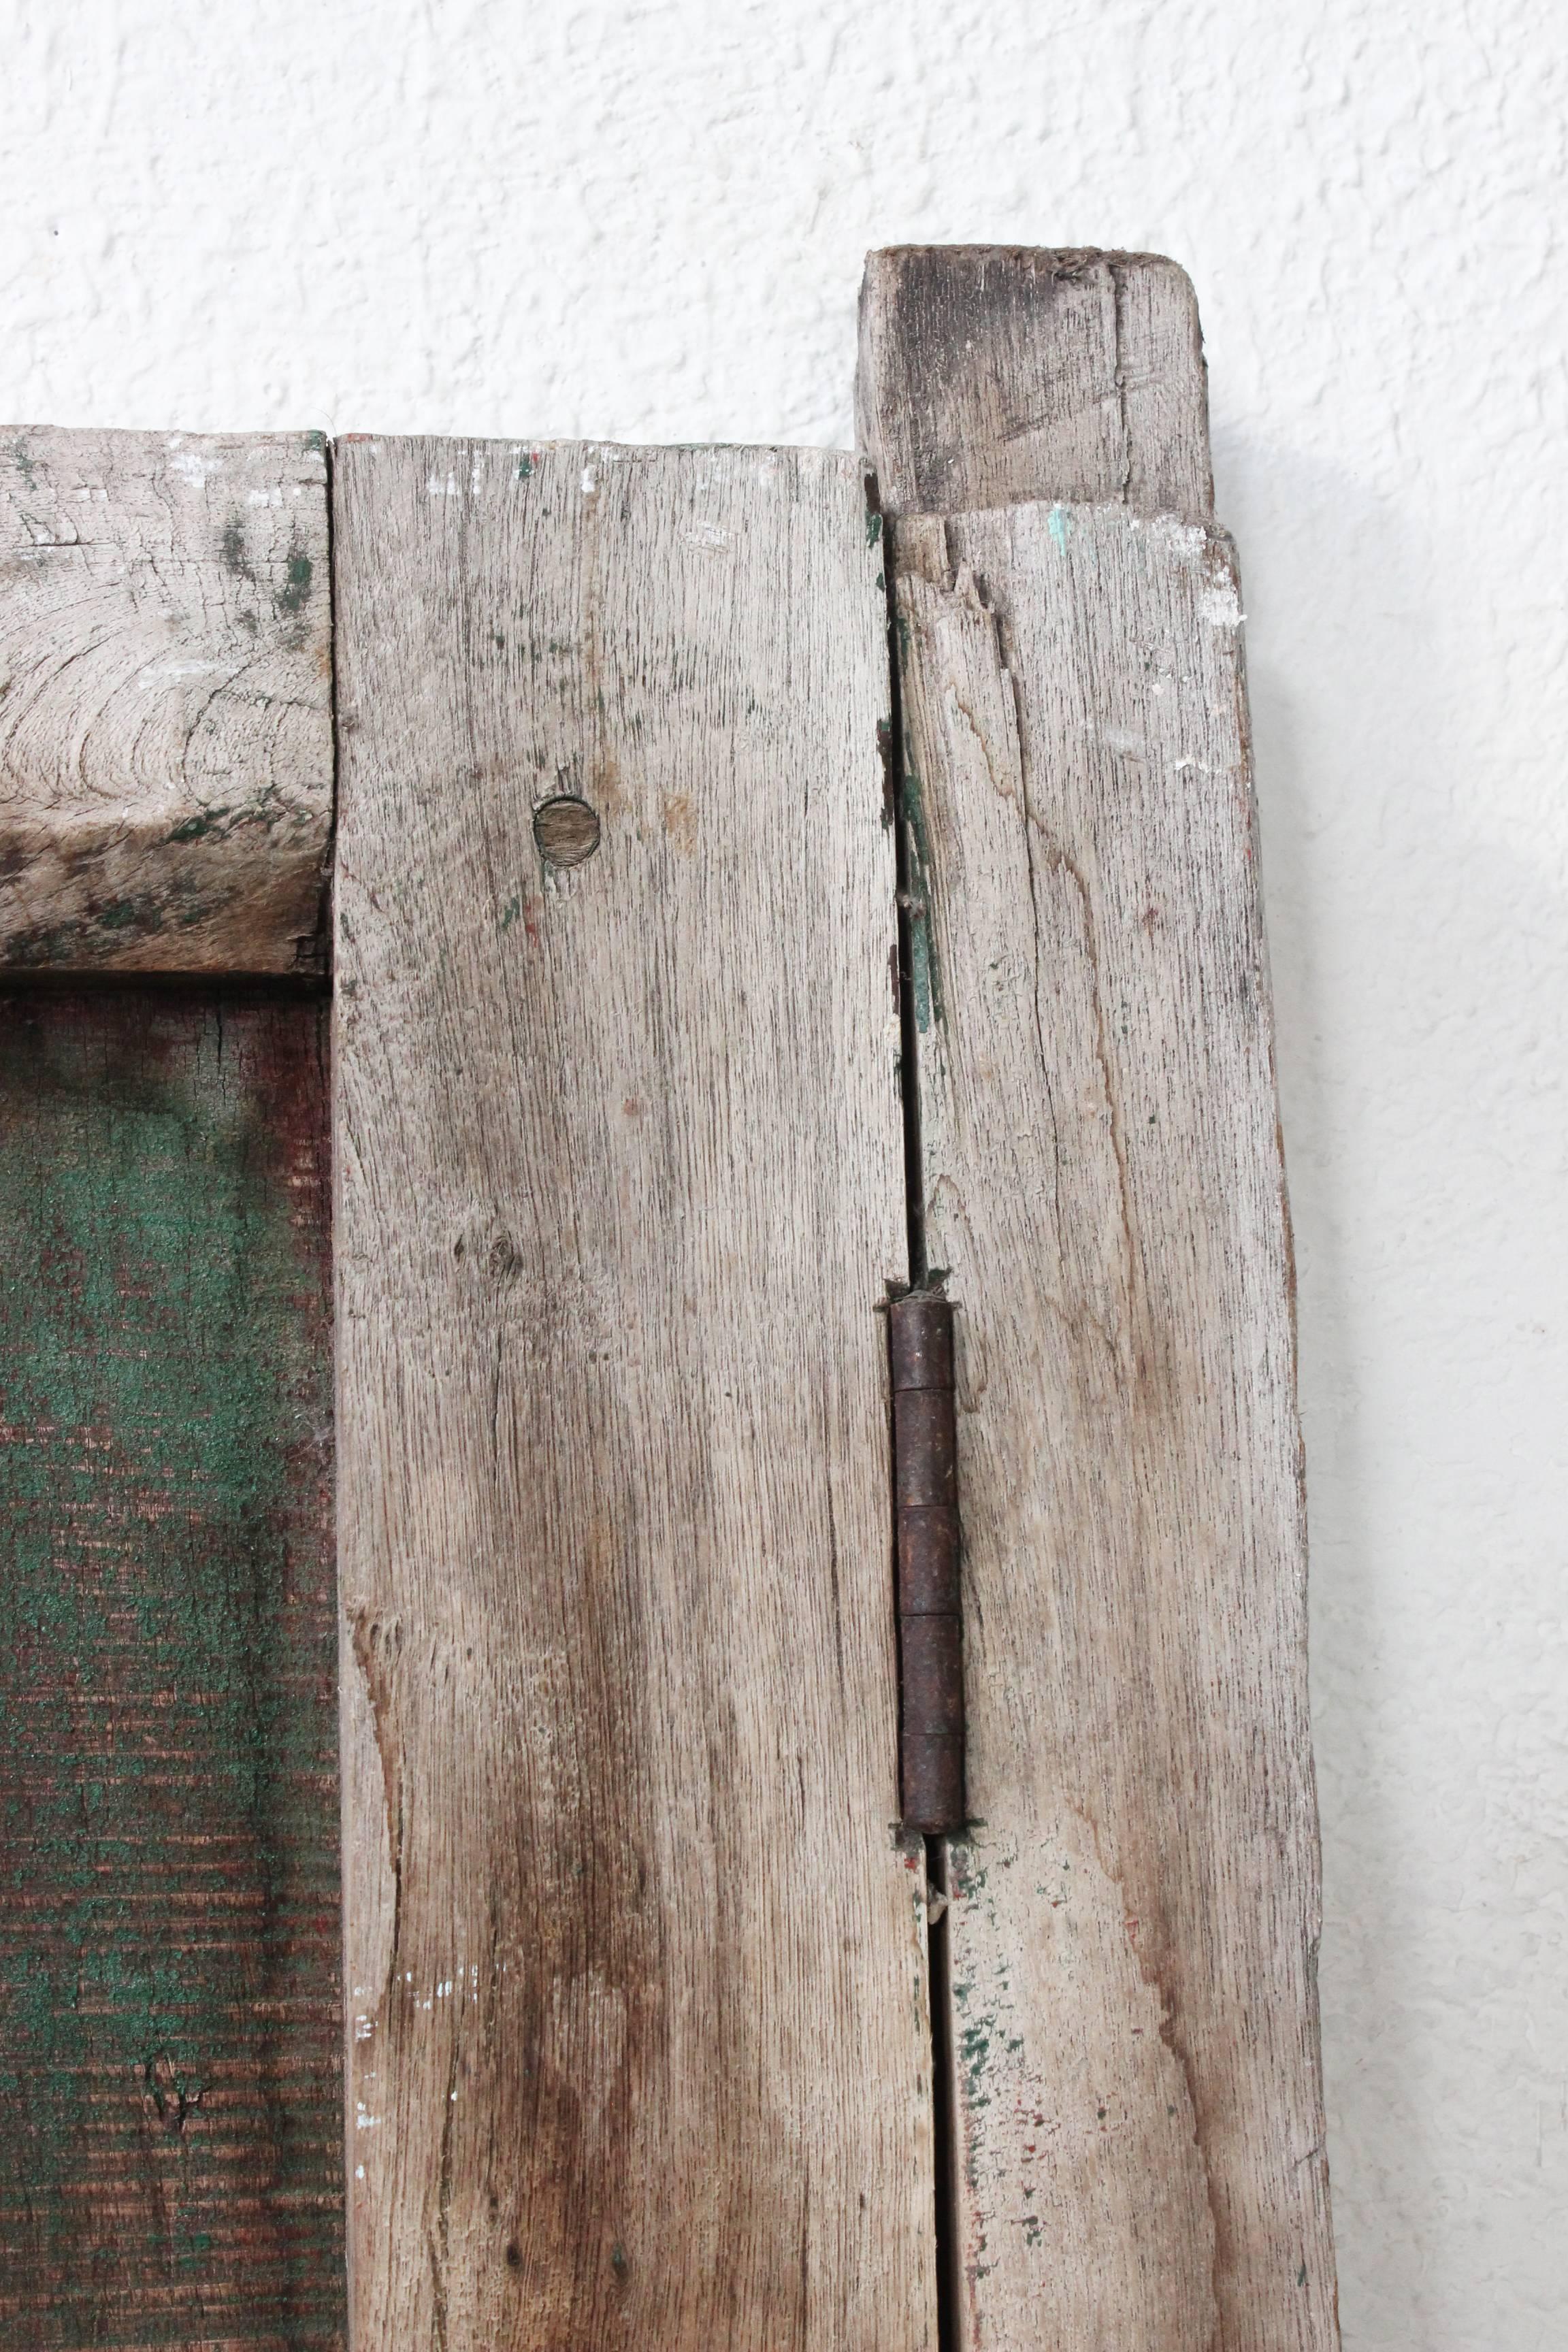 Hand-Crafted Early 20th Century Solid Mesquite Wood Door Found in Western México